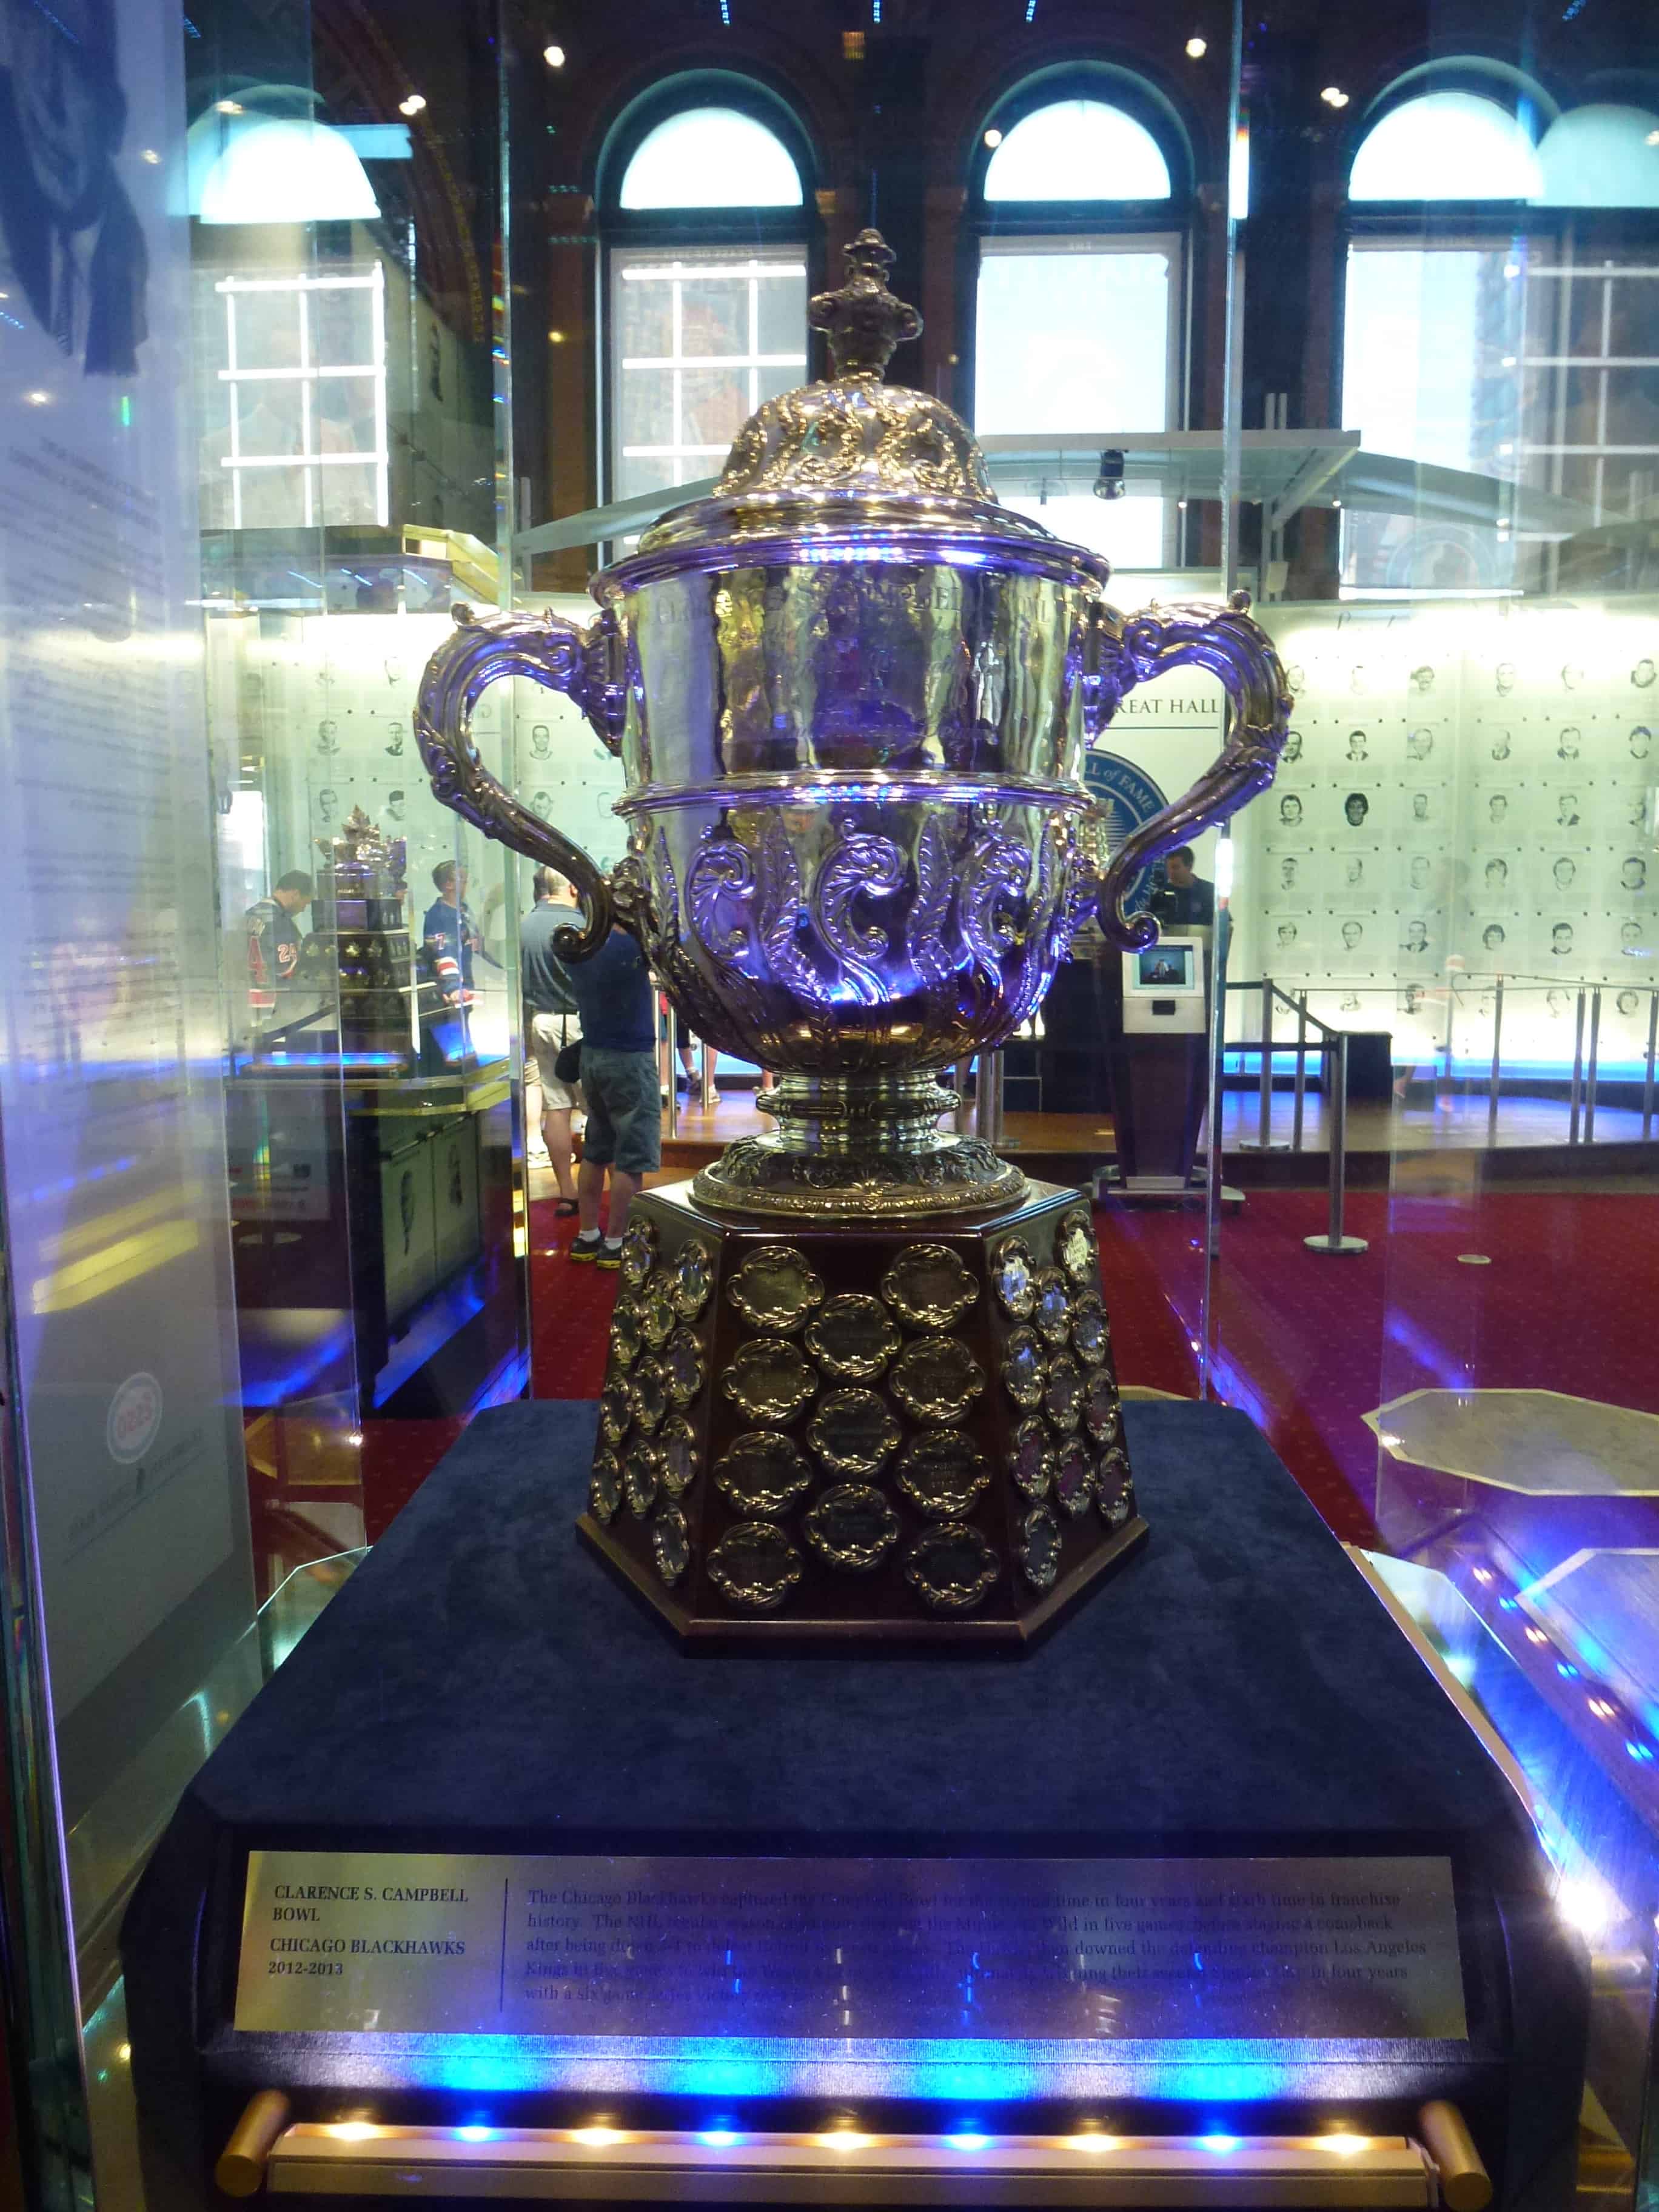 Campbell Bowl at the Hockey Hall of Fame in Toronto, Ontario, Canada